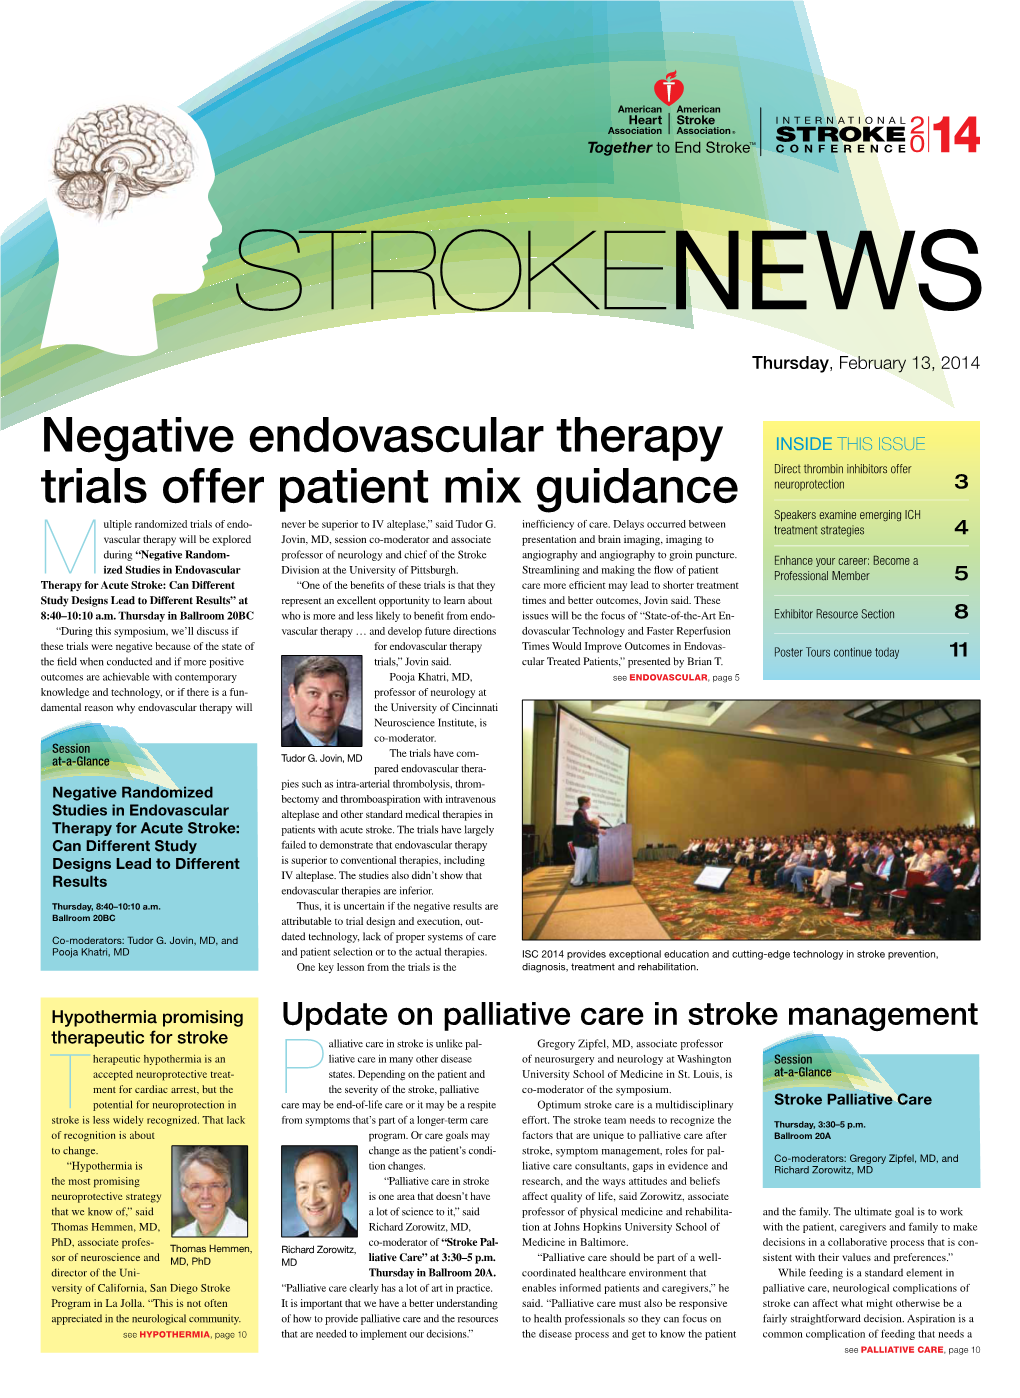 Negative Endovascular Therapy Trials Offer Patient Mix Guidance